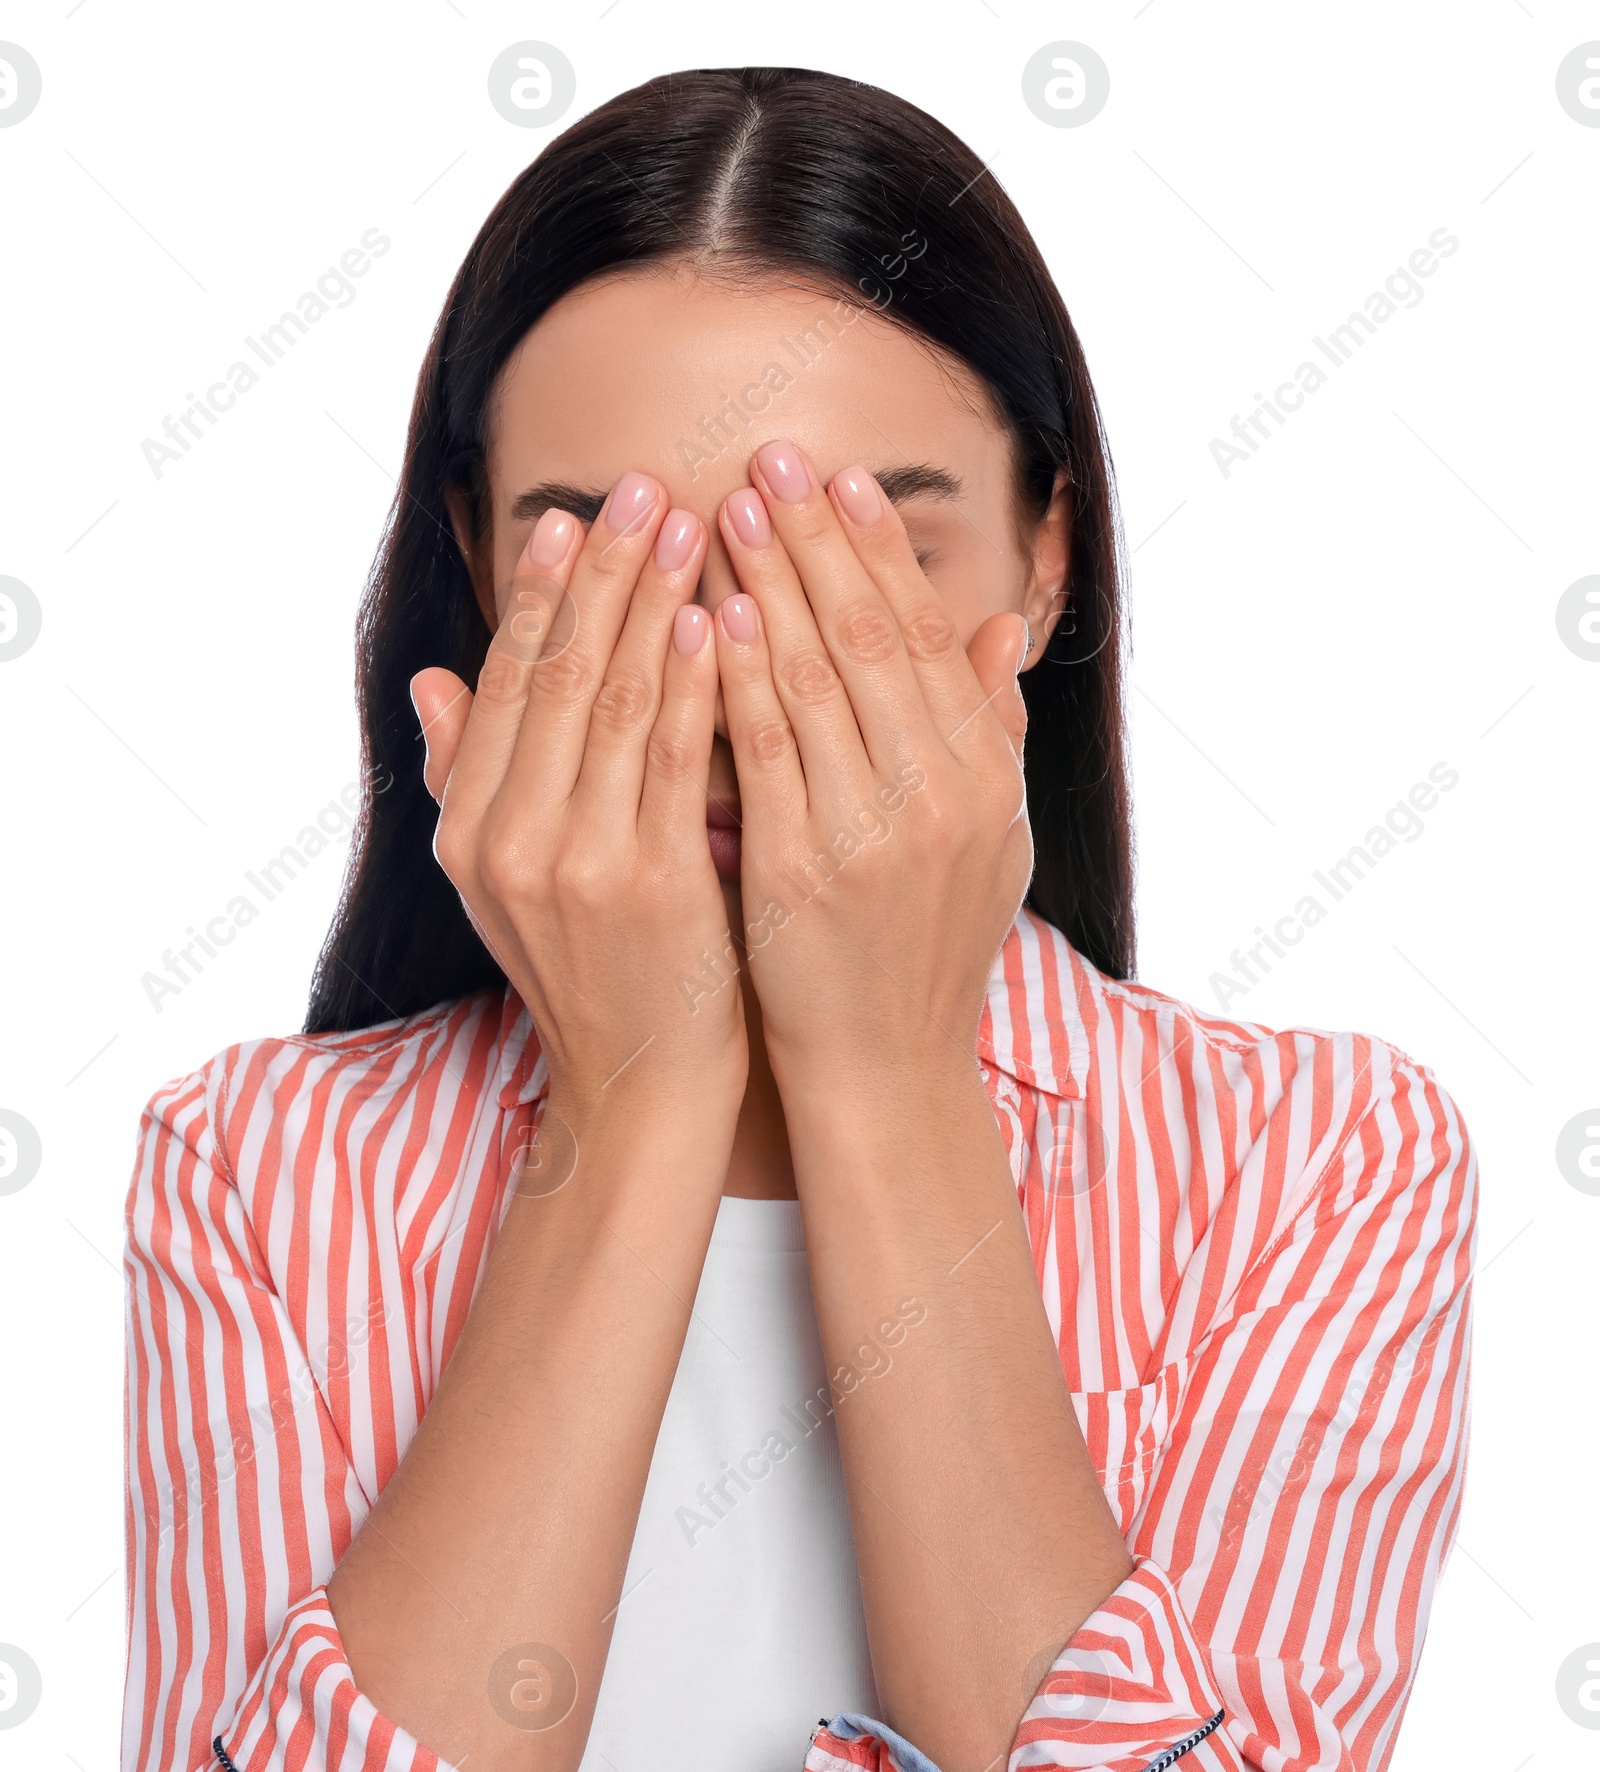 Photo of Embarrassed young woman covering face with hands on white background